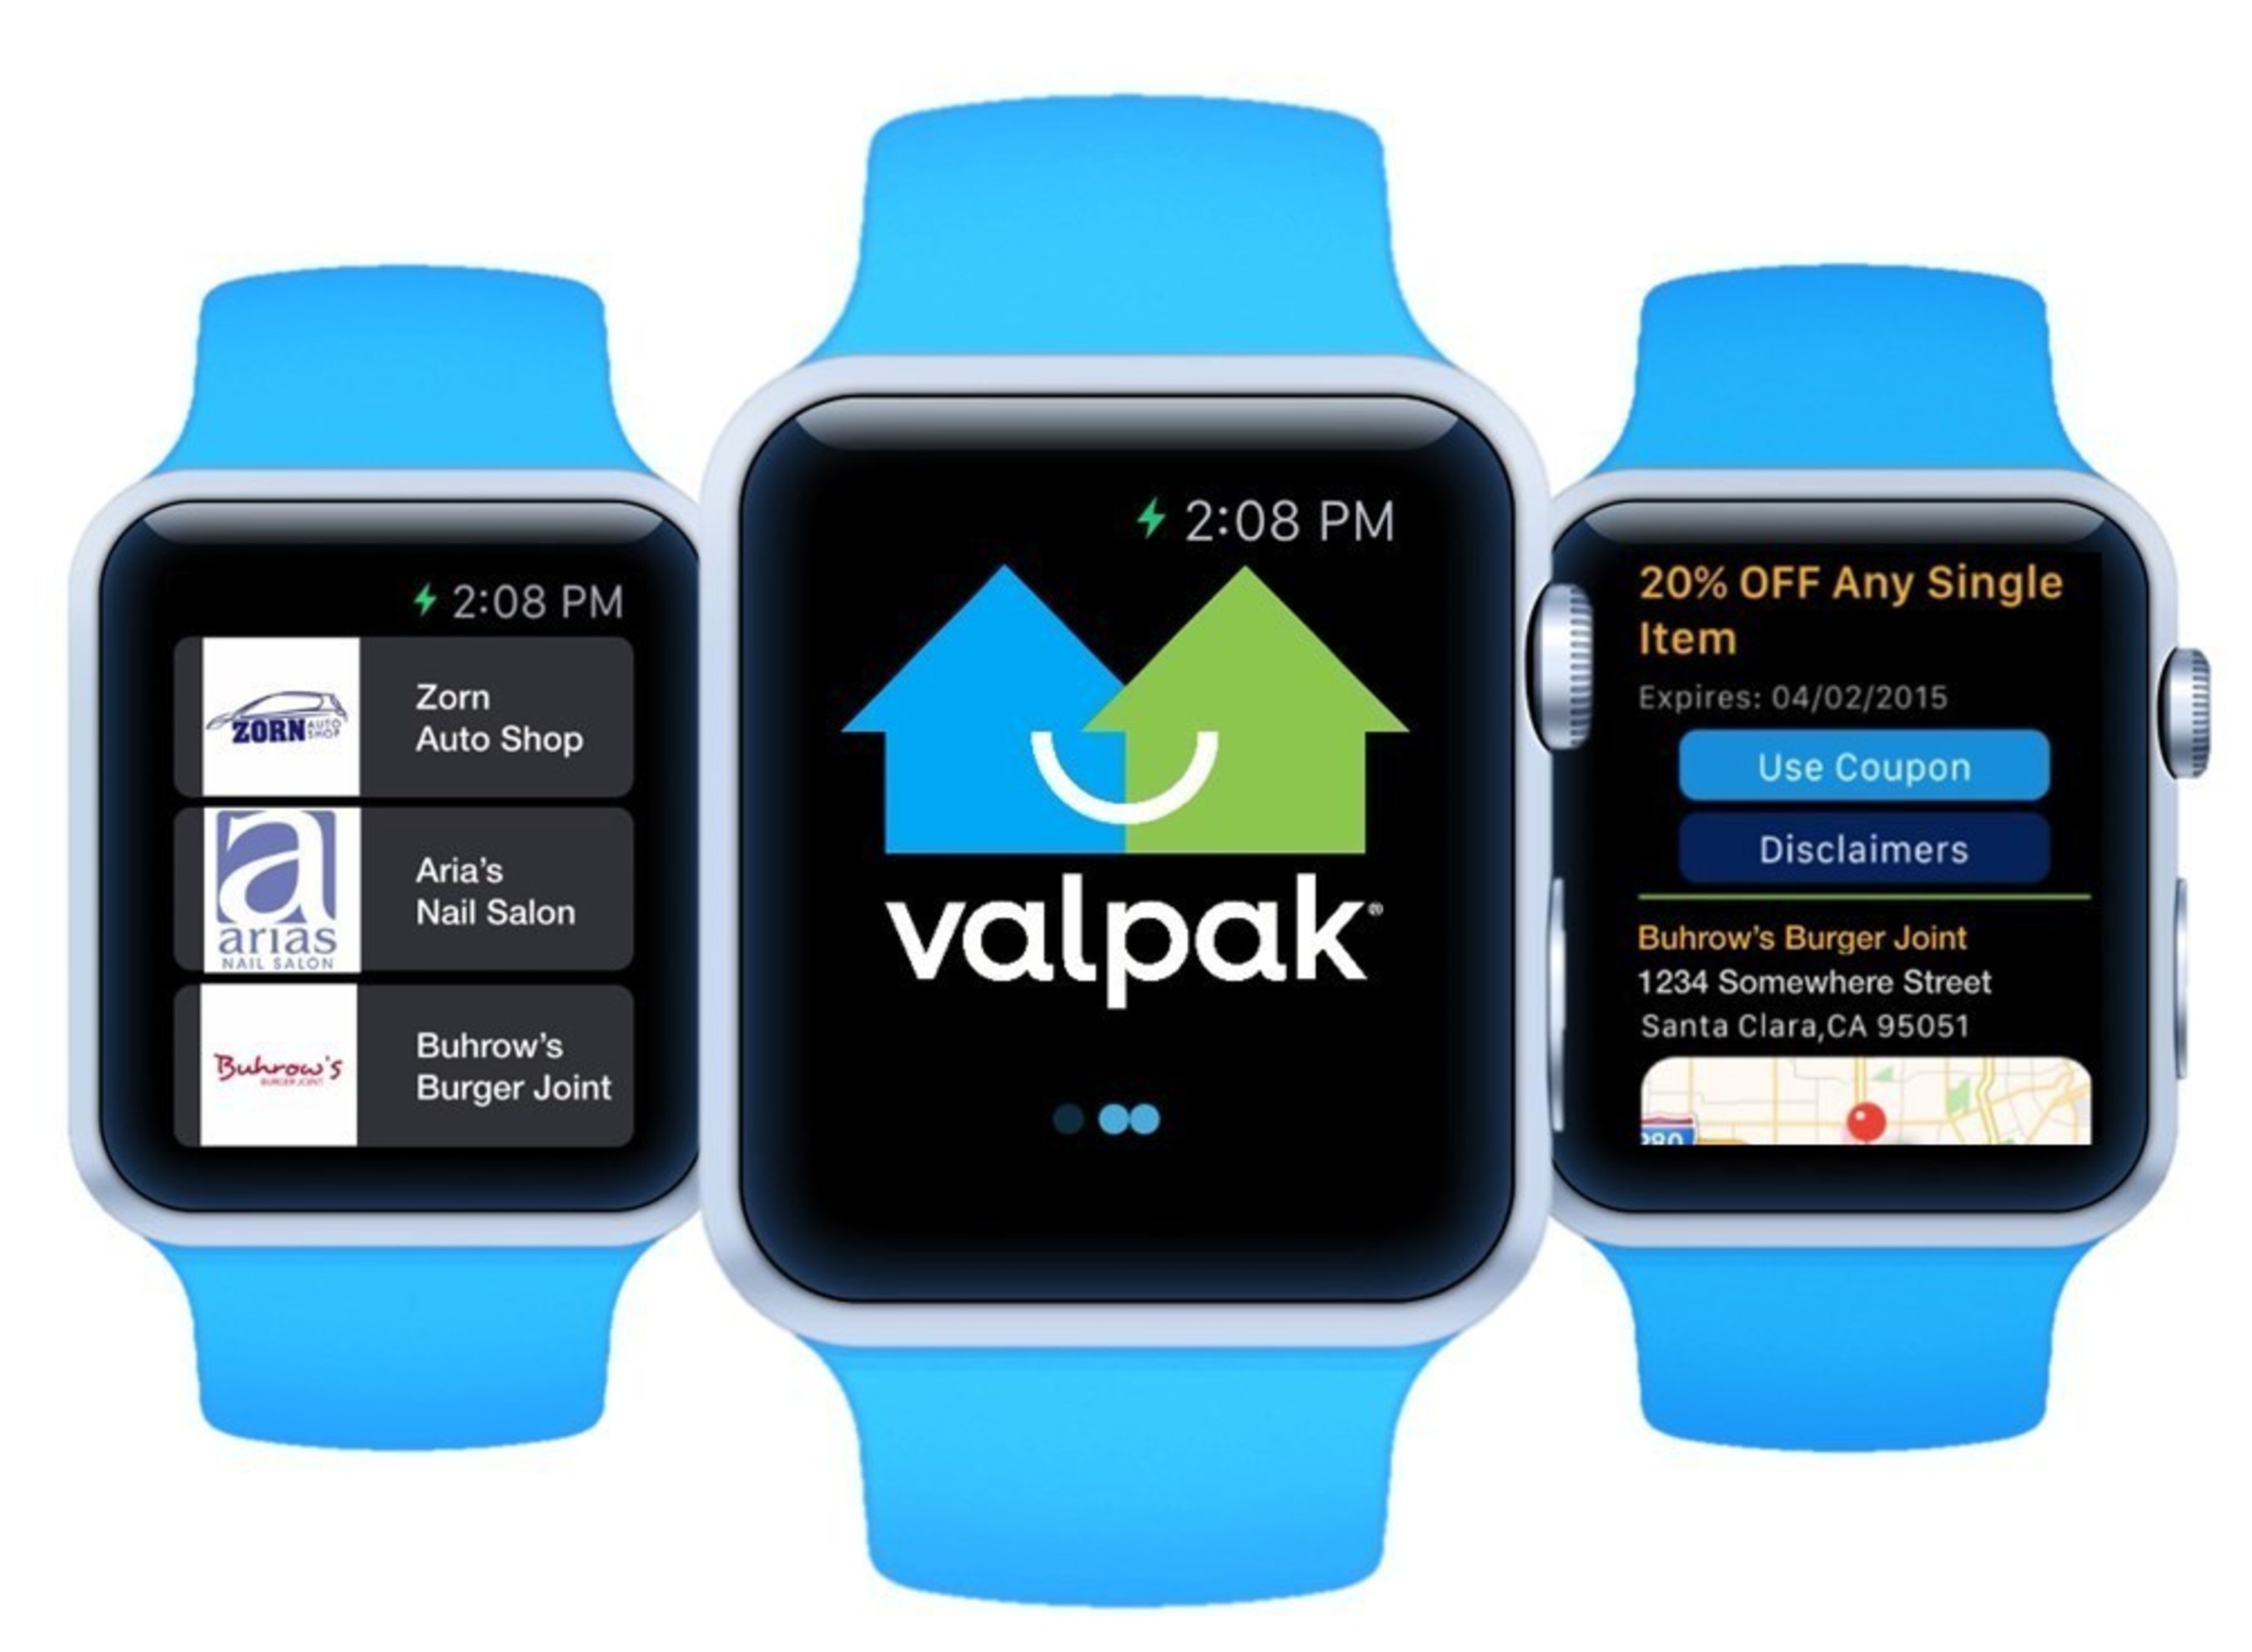 Valpak Launches Coupon App for New Apple Watch